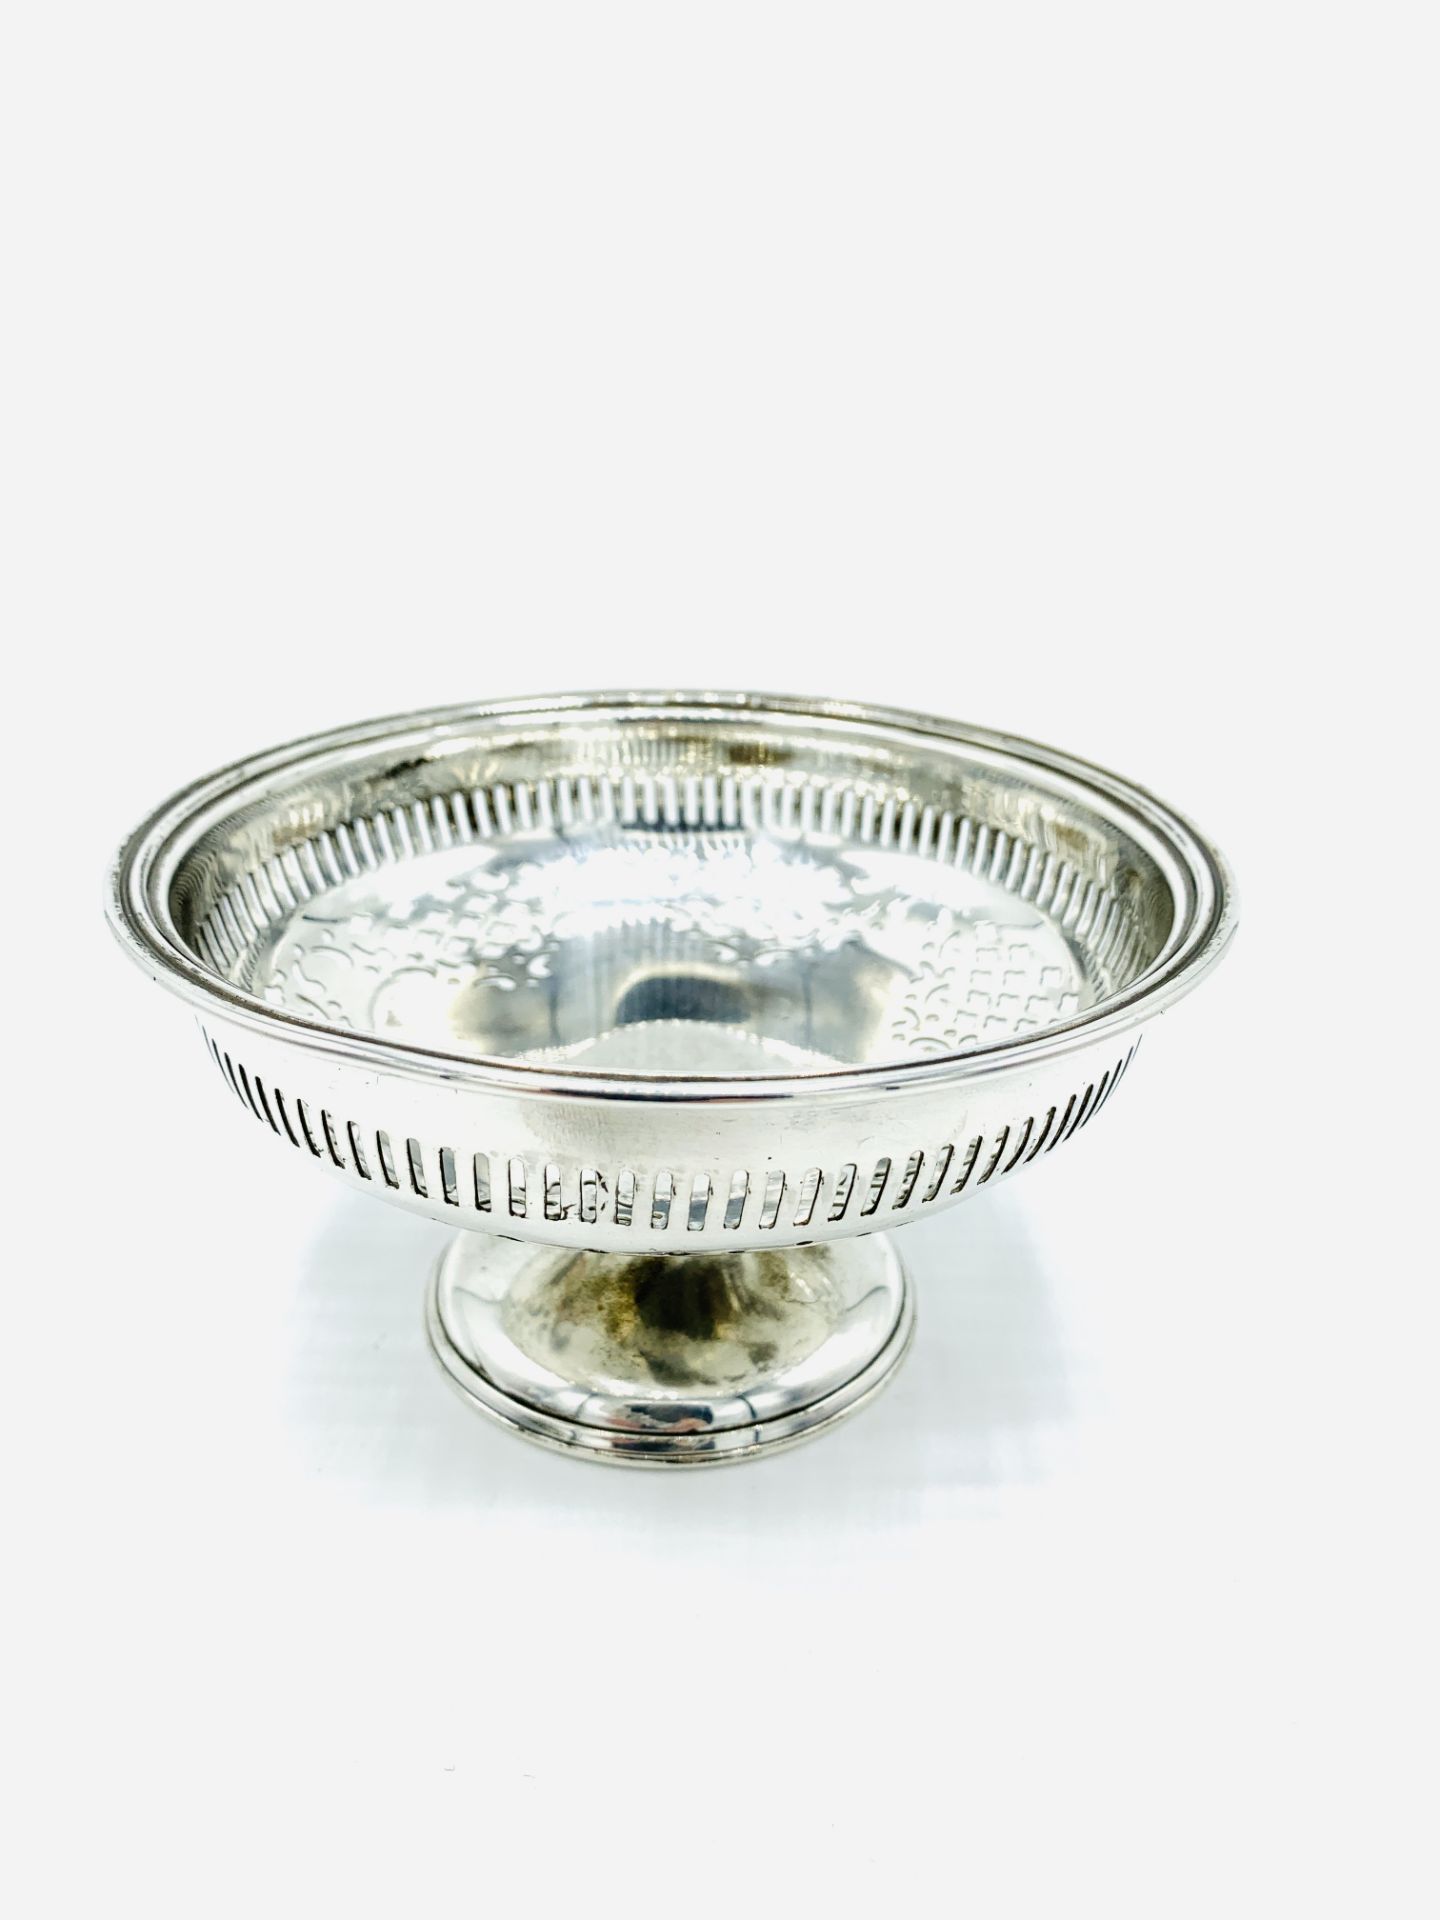 Sterling silver footed dish with pierced decoration to the rim by Emile Viners.